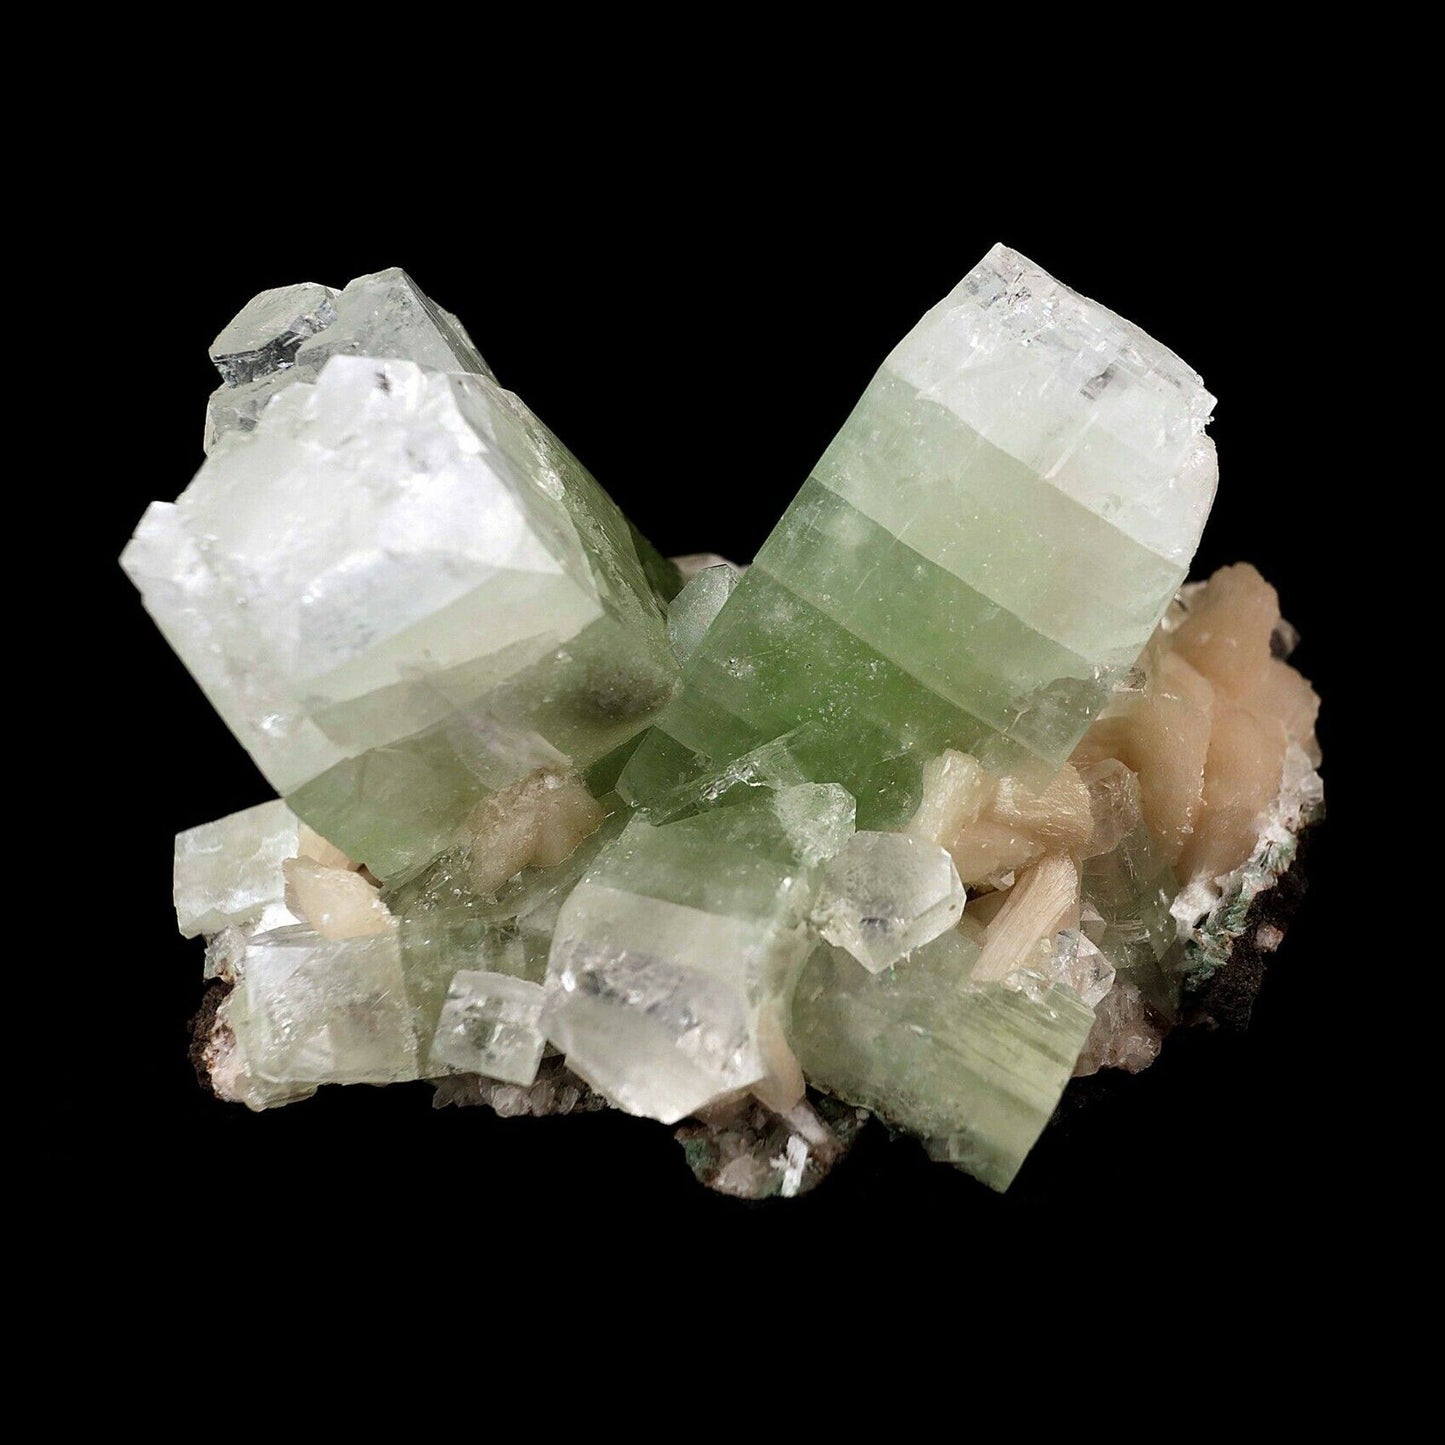 Apophyllite green crystal with Stilbite Natural Mineral Specimen # B 3…  https://www.superbminerals.us/products/apophyllite-green-crystal-with-stilbite-natural-mineral-specimen-b-3607  Features:Two large, green apophyllite cubes in 'V' formation with strong green shade. along with pink Stilbite bow shape formation. Primary Mineral(s): ApophylliteSecondary Mineral(s): StilbiteMatrix: N/A12 cm x 9 cm860 GmsLocality: Nashik, Maharashtra, IndiaYear of Discovery: 2020